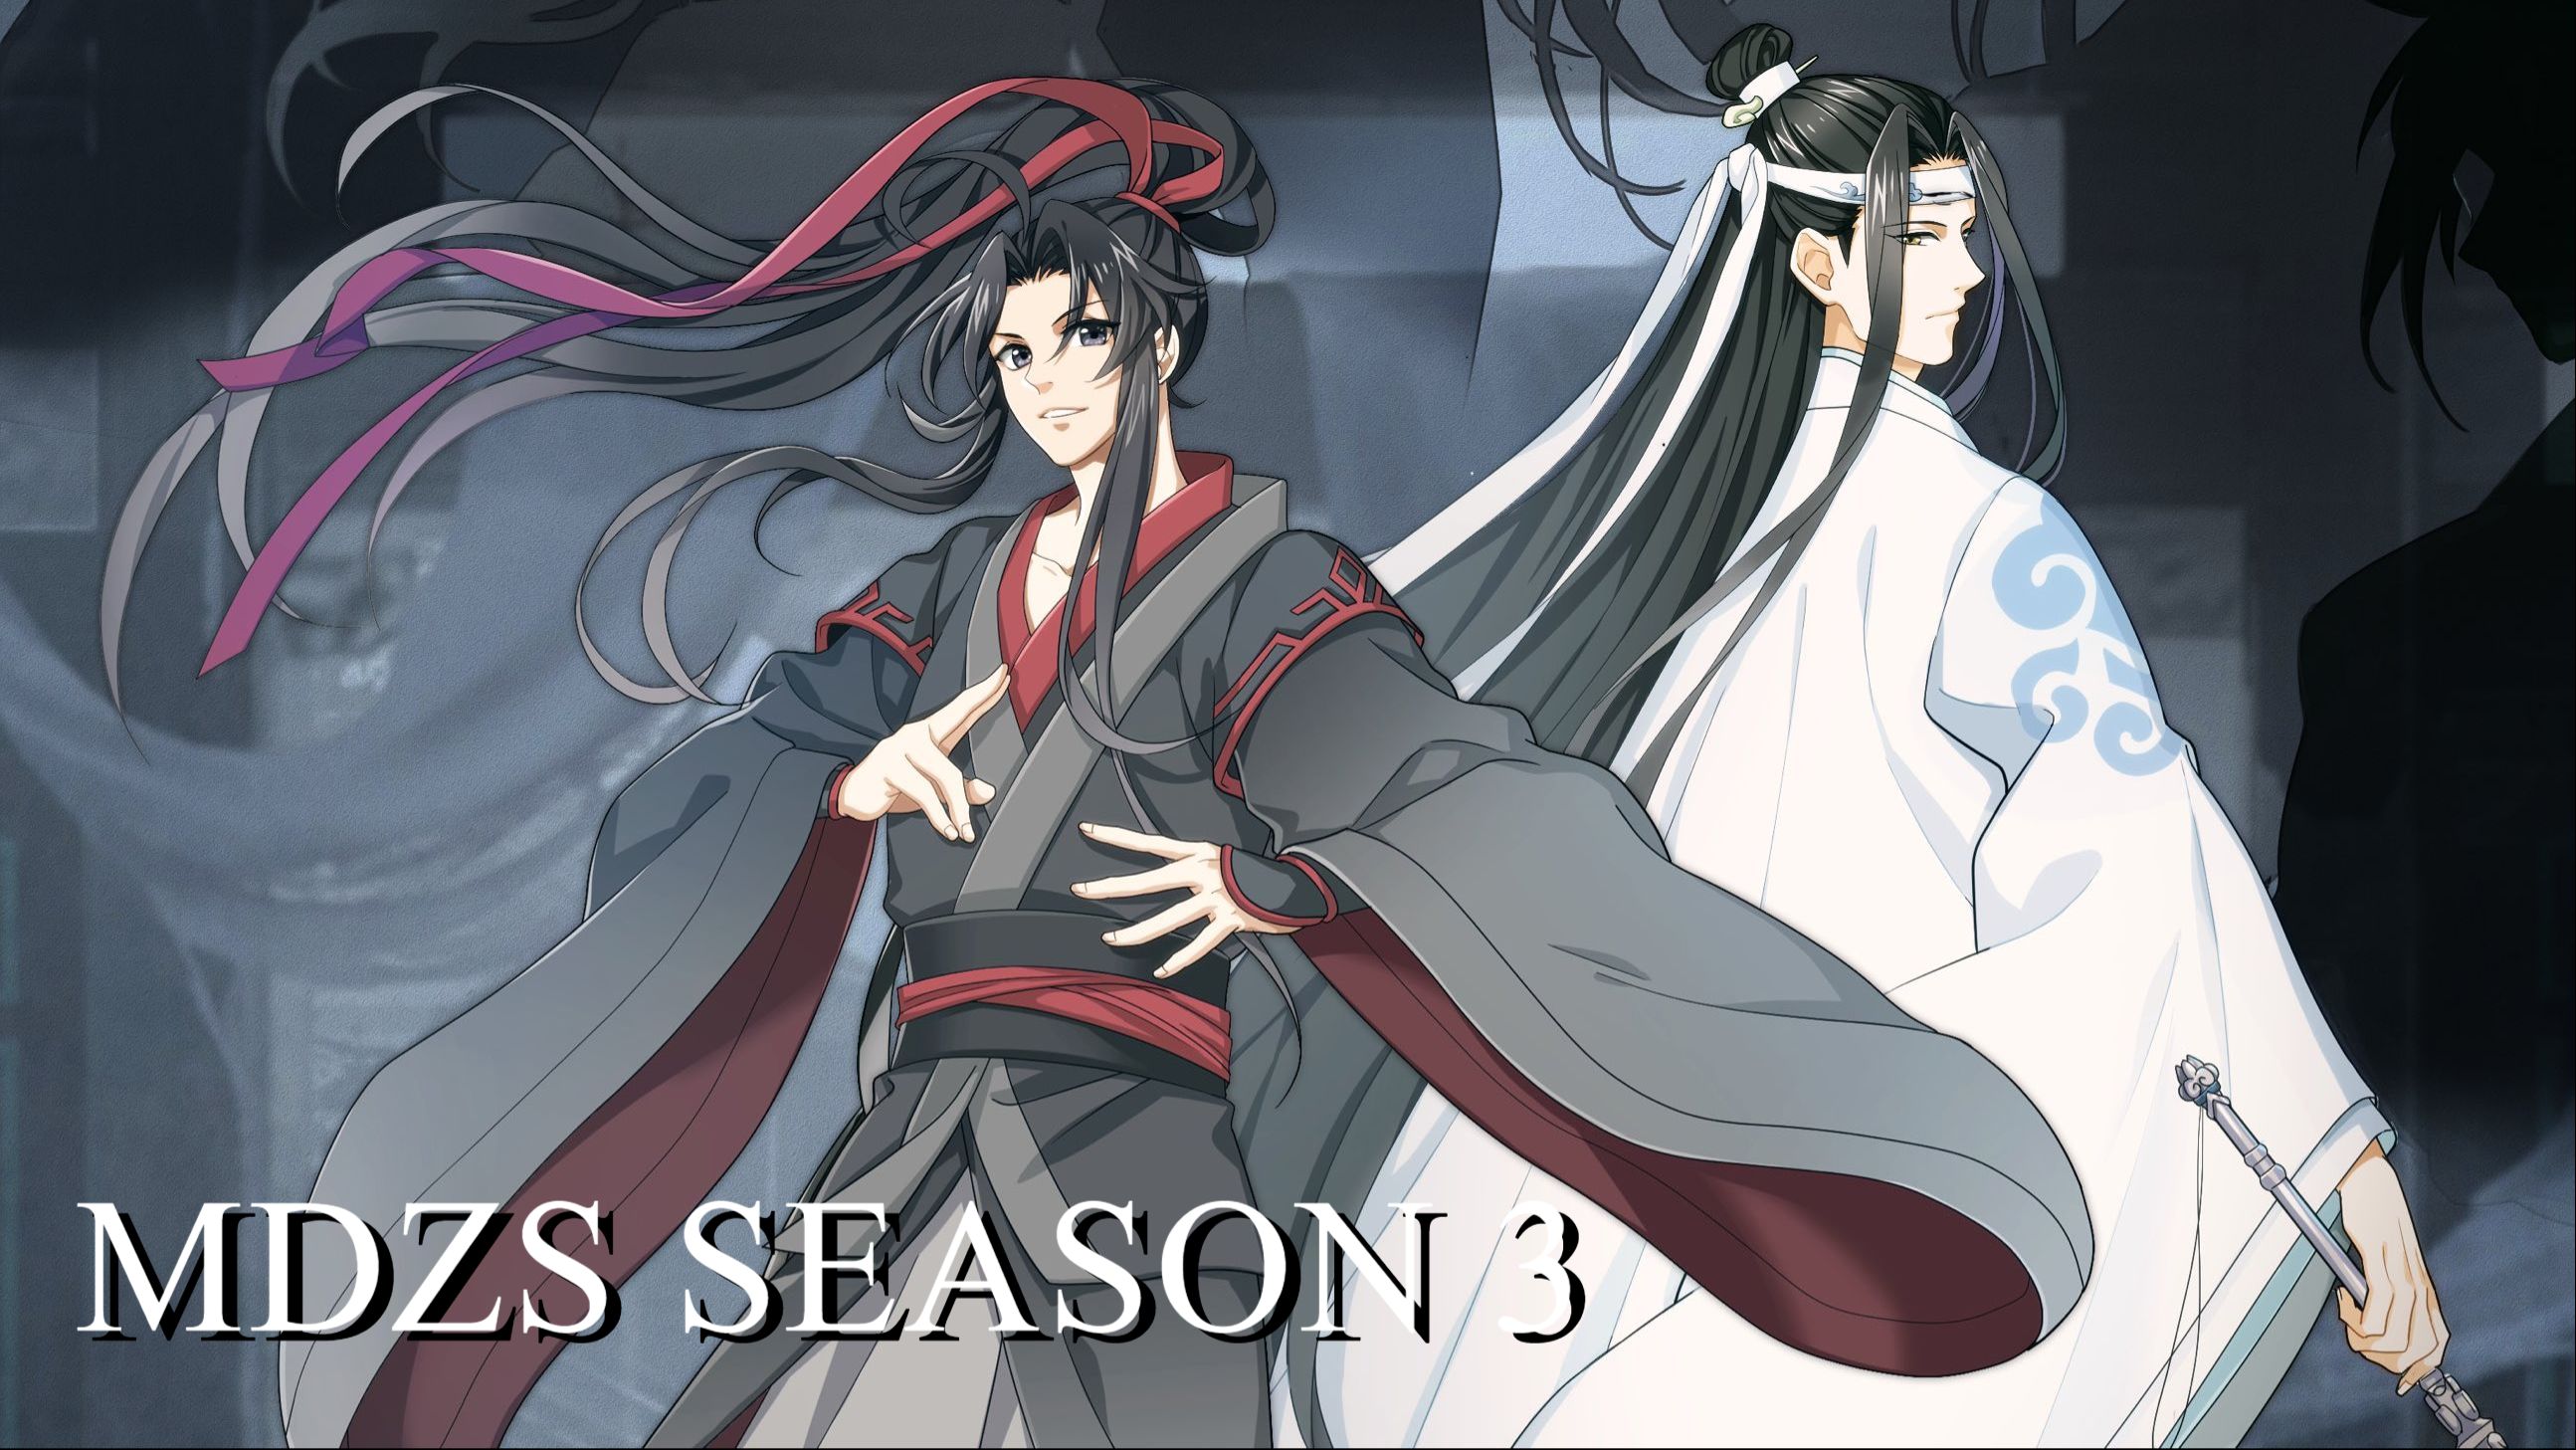 Will There Be a Season 4 of Mo Dao Zu Shi? Predictions After Season 3